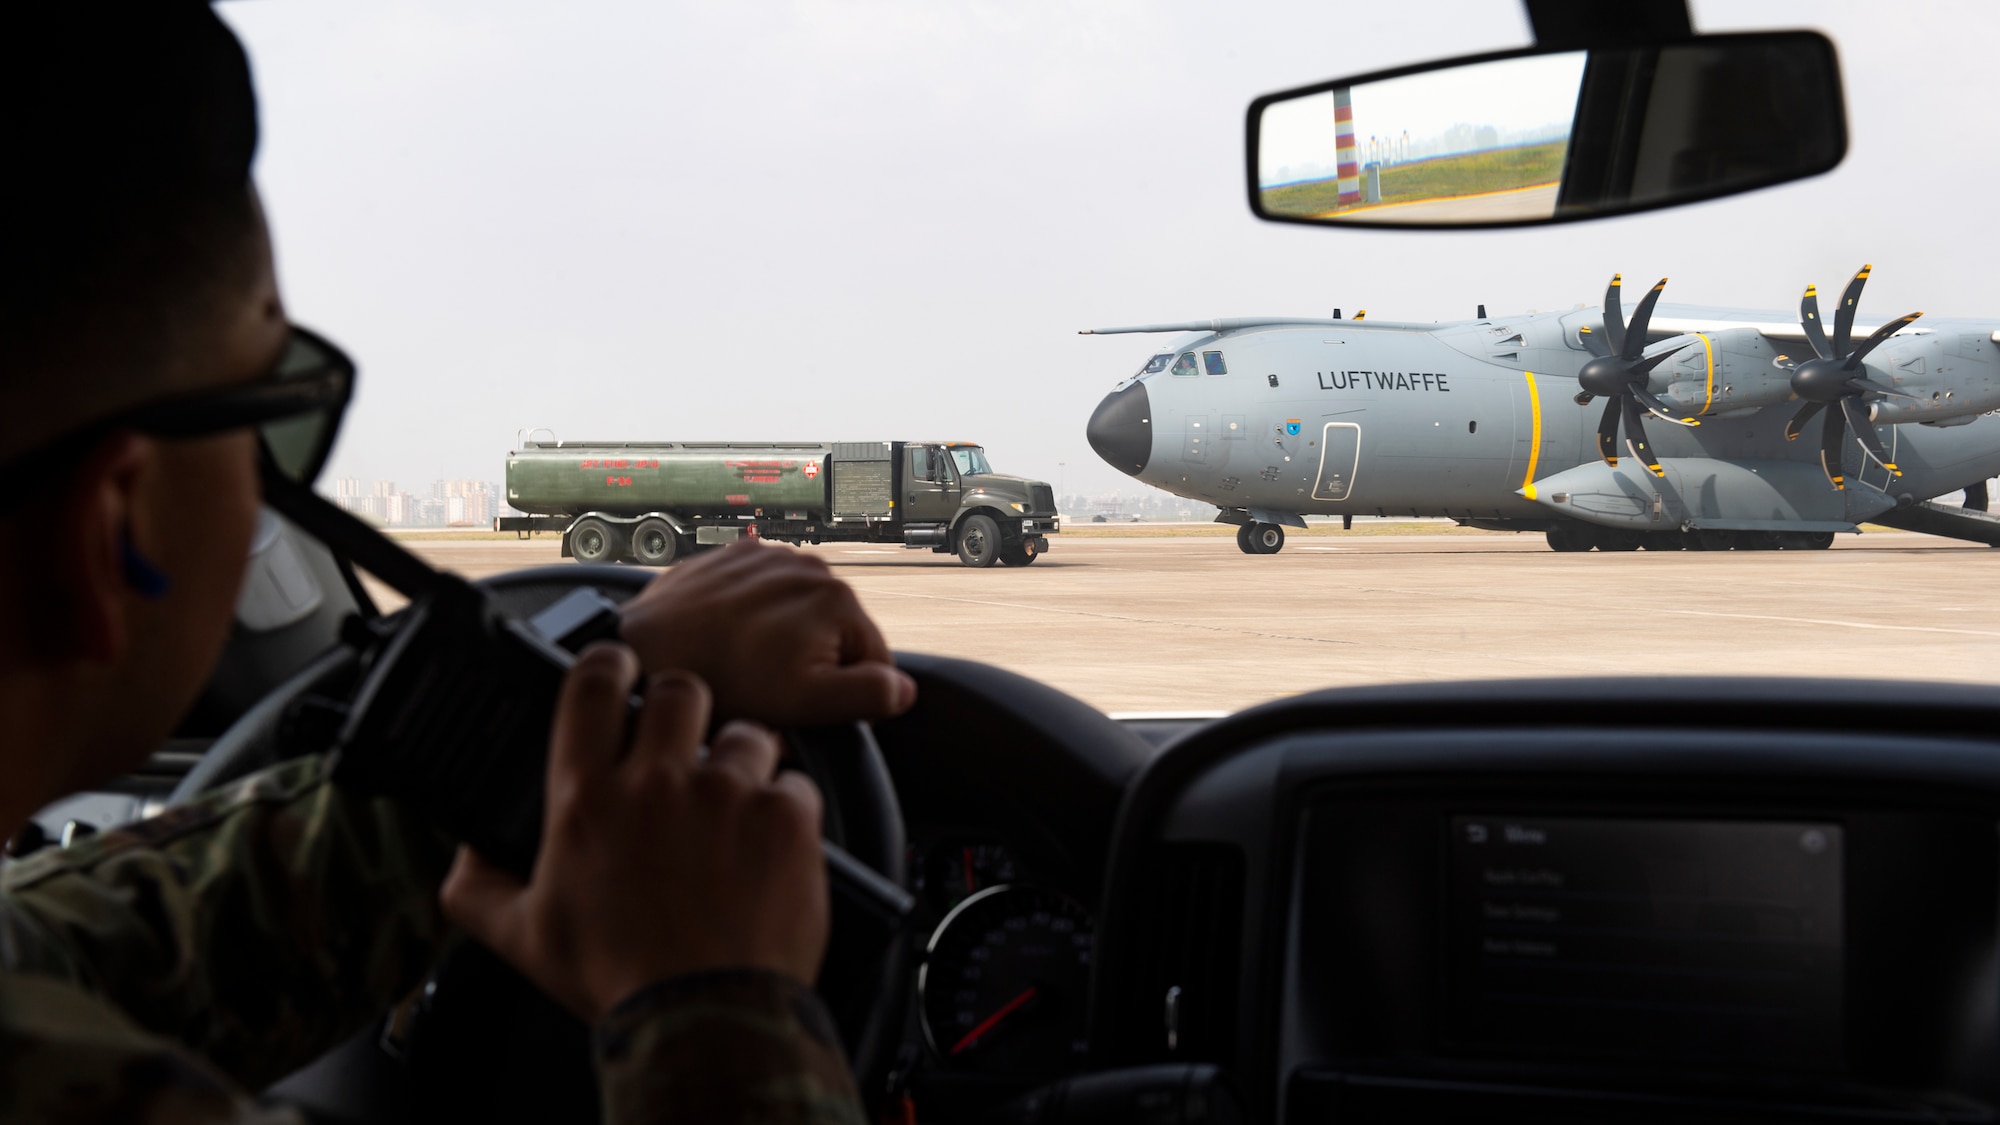 U.S. Air Force Staff Sgt. Ryan Vasquez, a fuels equipment maintenance supervisor assigned to the 39th Logistics Readiness Squadron, coordinates an R-11 fuel truck movement near a German Air Force A400M Atlas military transport aircraft in support of Turkish government earthquake relief operations March 3, 2023, at Incirlik Air Base, Türkiye. U.S. military organizations are working with interagency colleagues to harness the unique capabilities available to assist those affected by the earthquakes. The U.S. military’s role during these relief missions is to rapidly respond to this natural disaster with critical support capabilities and life-saving equipment, transporting assistance for aid areas the government of Türkiye deems most necessary. (U.S. Air Force photo by Staff Sgt. Peter Reft)